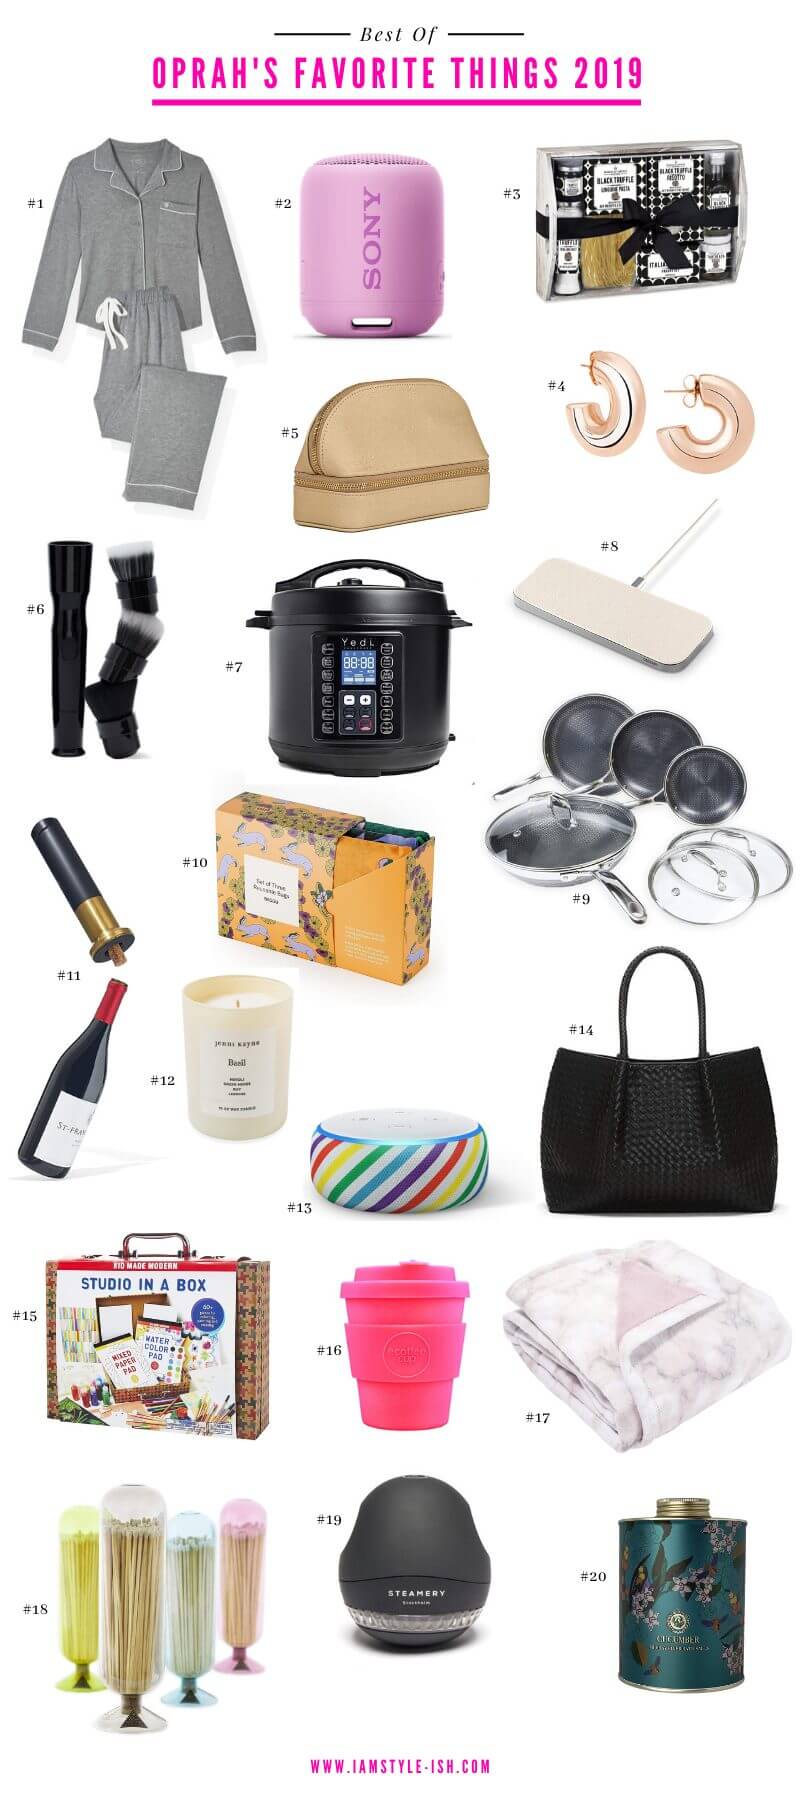 Best of Oprah's Favorite Things 2019, oprah's favorite things list 2019, amazon holiday gift ideas, gifts from amazon, gift ideas, best gift ideas 2019, best holiday gift ideas, holiday gift ideas, gifts for her, gifts for him, best technology gifts, best cooking gifts, best beauty gifts, gift ideas, kids gifts, last minute gifts